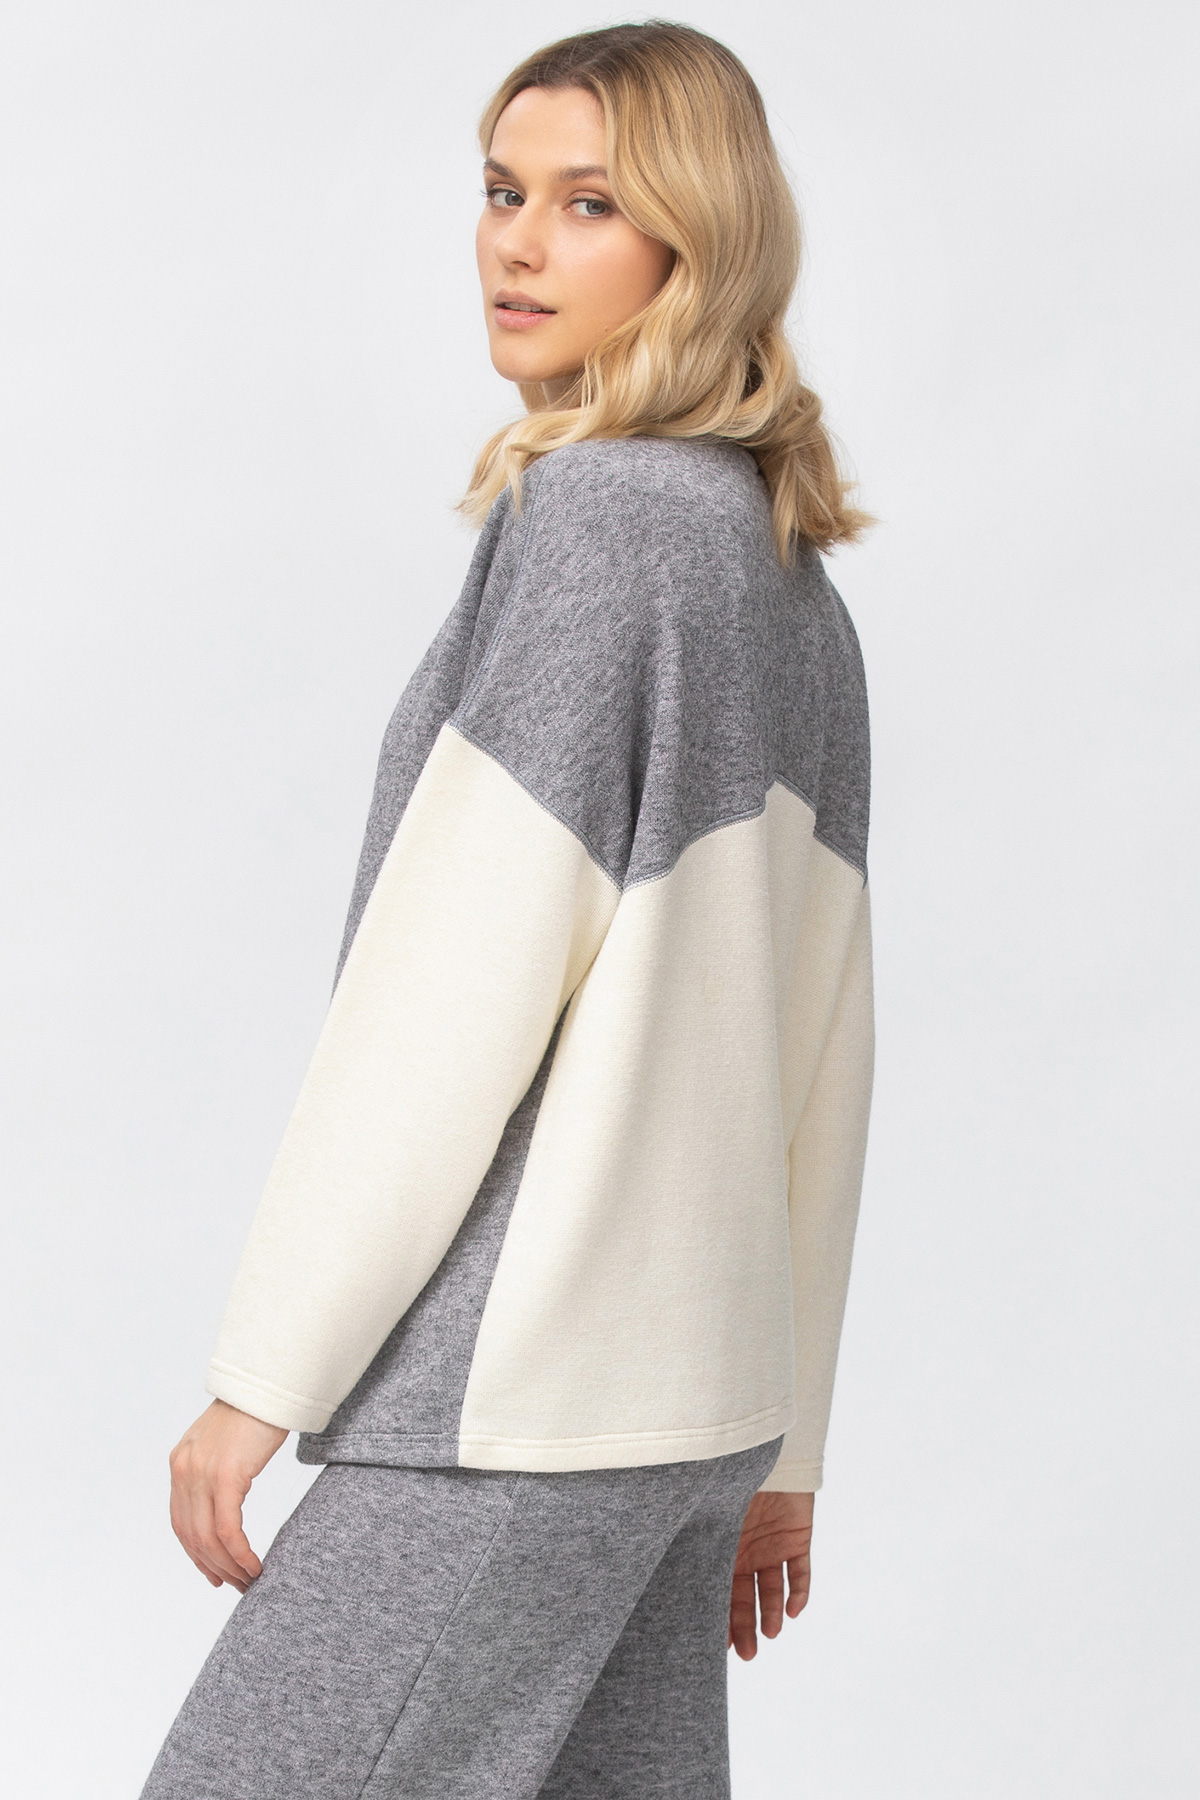 The Cozy Maternity Knitted JUMPER in Grey & Butter - hautemama